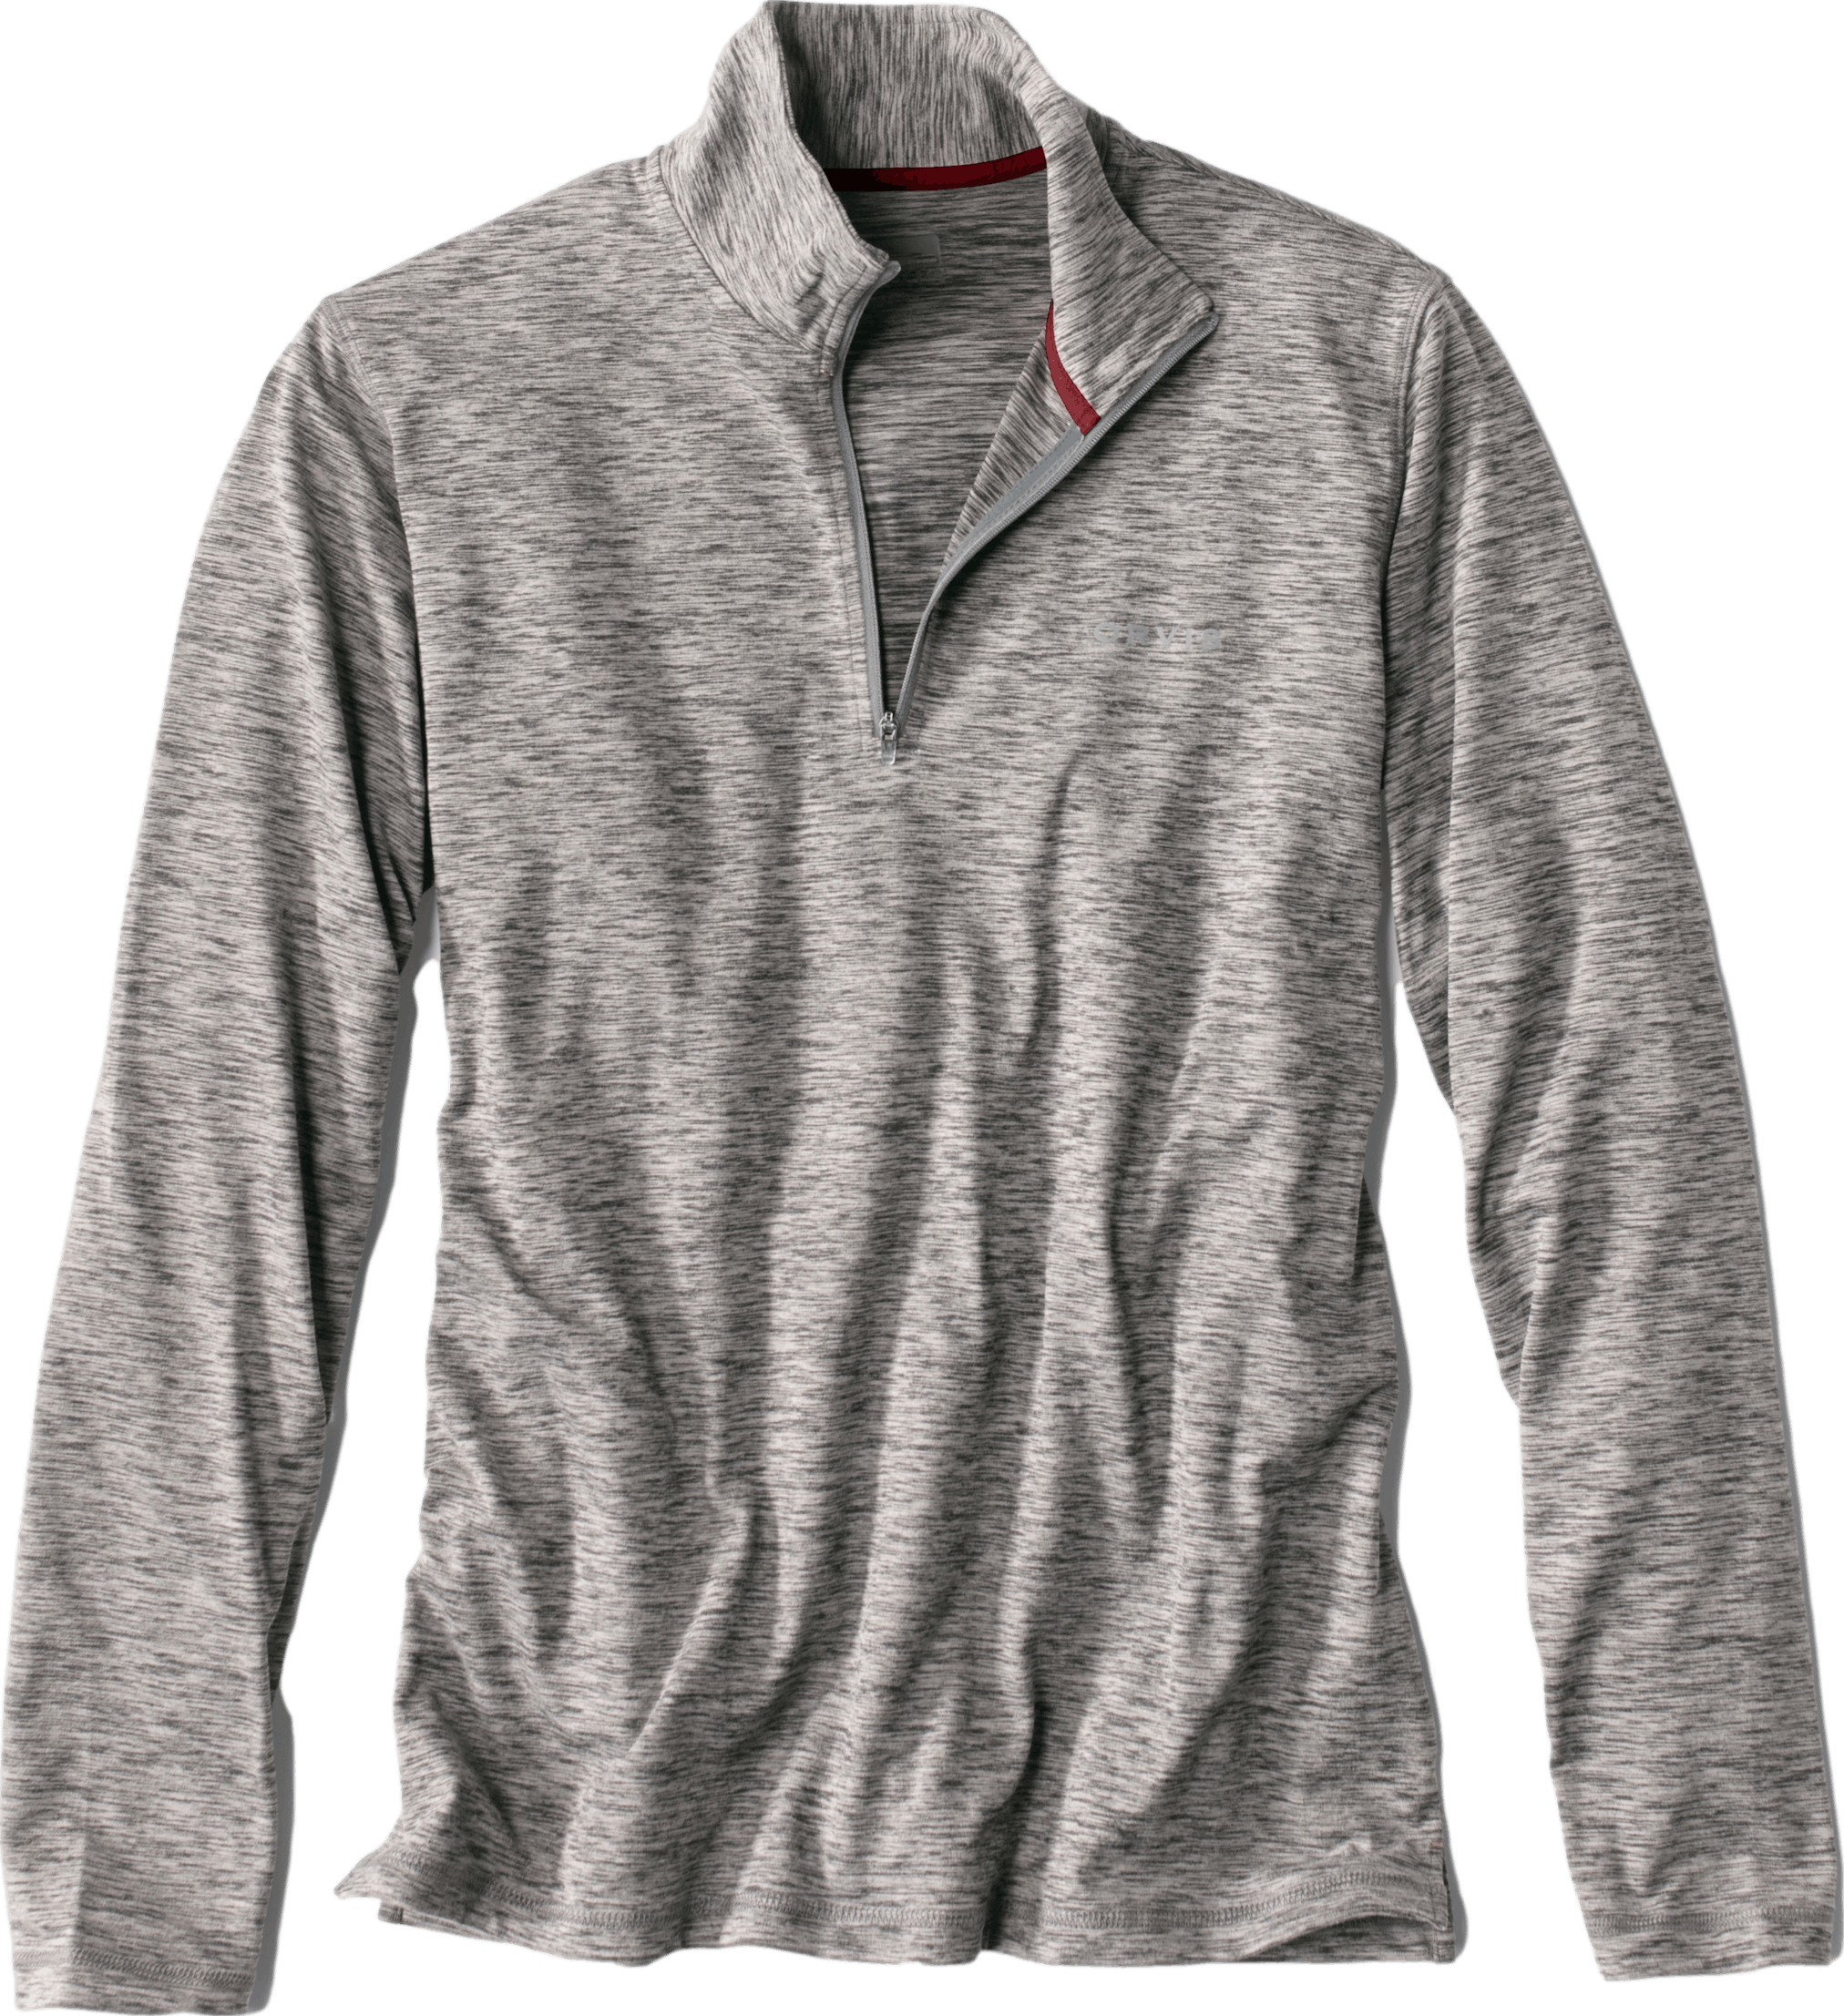 The 9 Most Recommended Fly Fishing Shirts